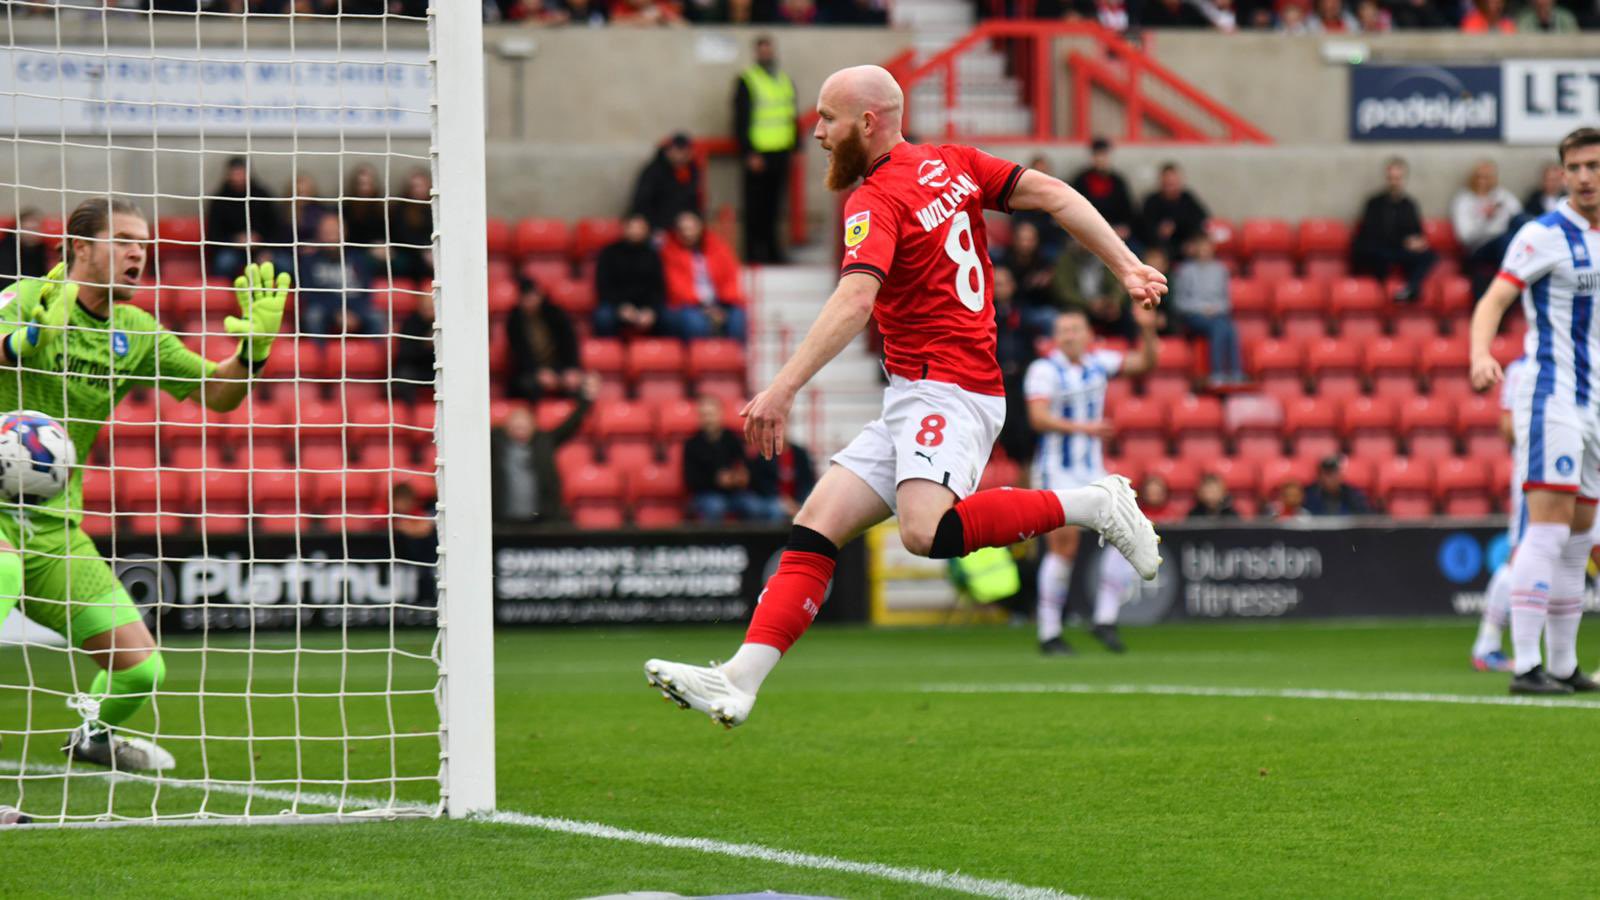 Swindon Town beat Hartlepool United 2-1 at the County Ground in League Two